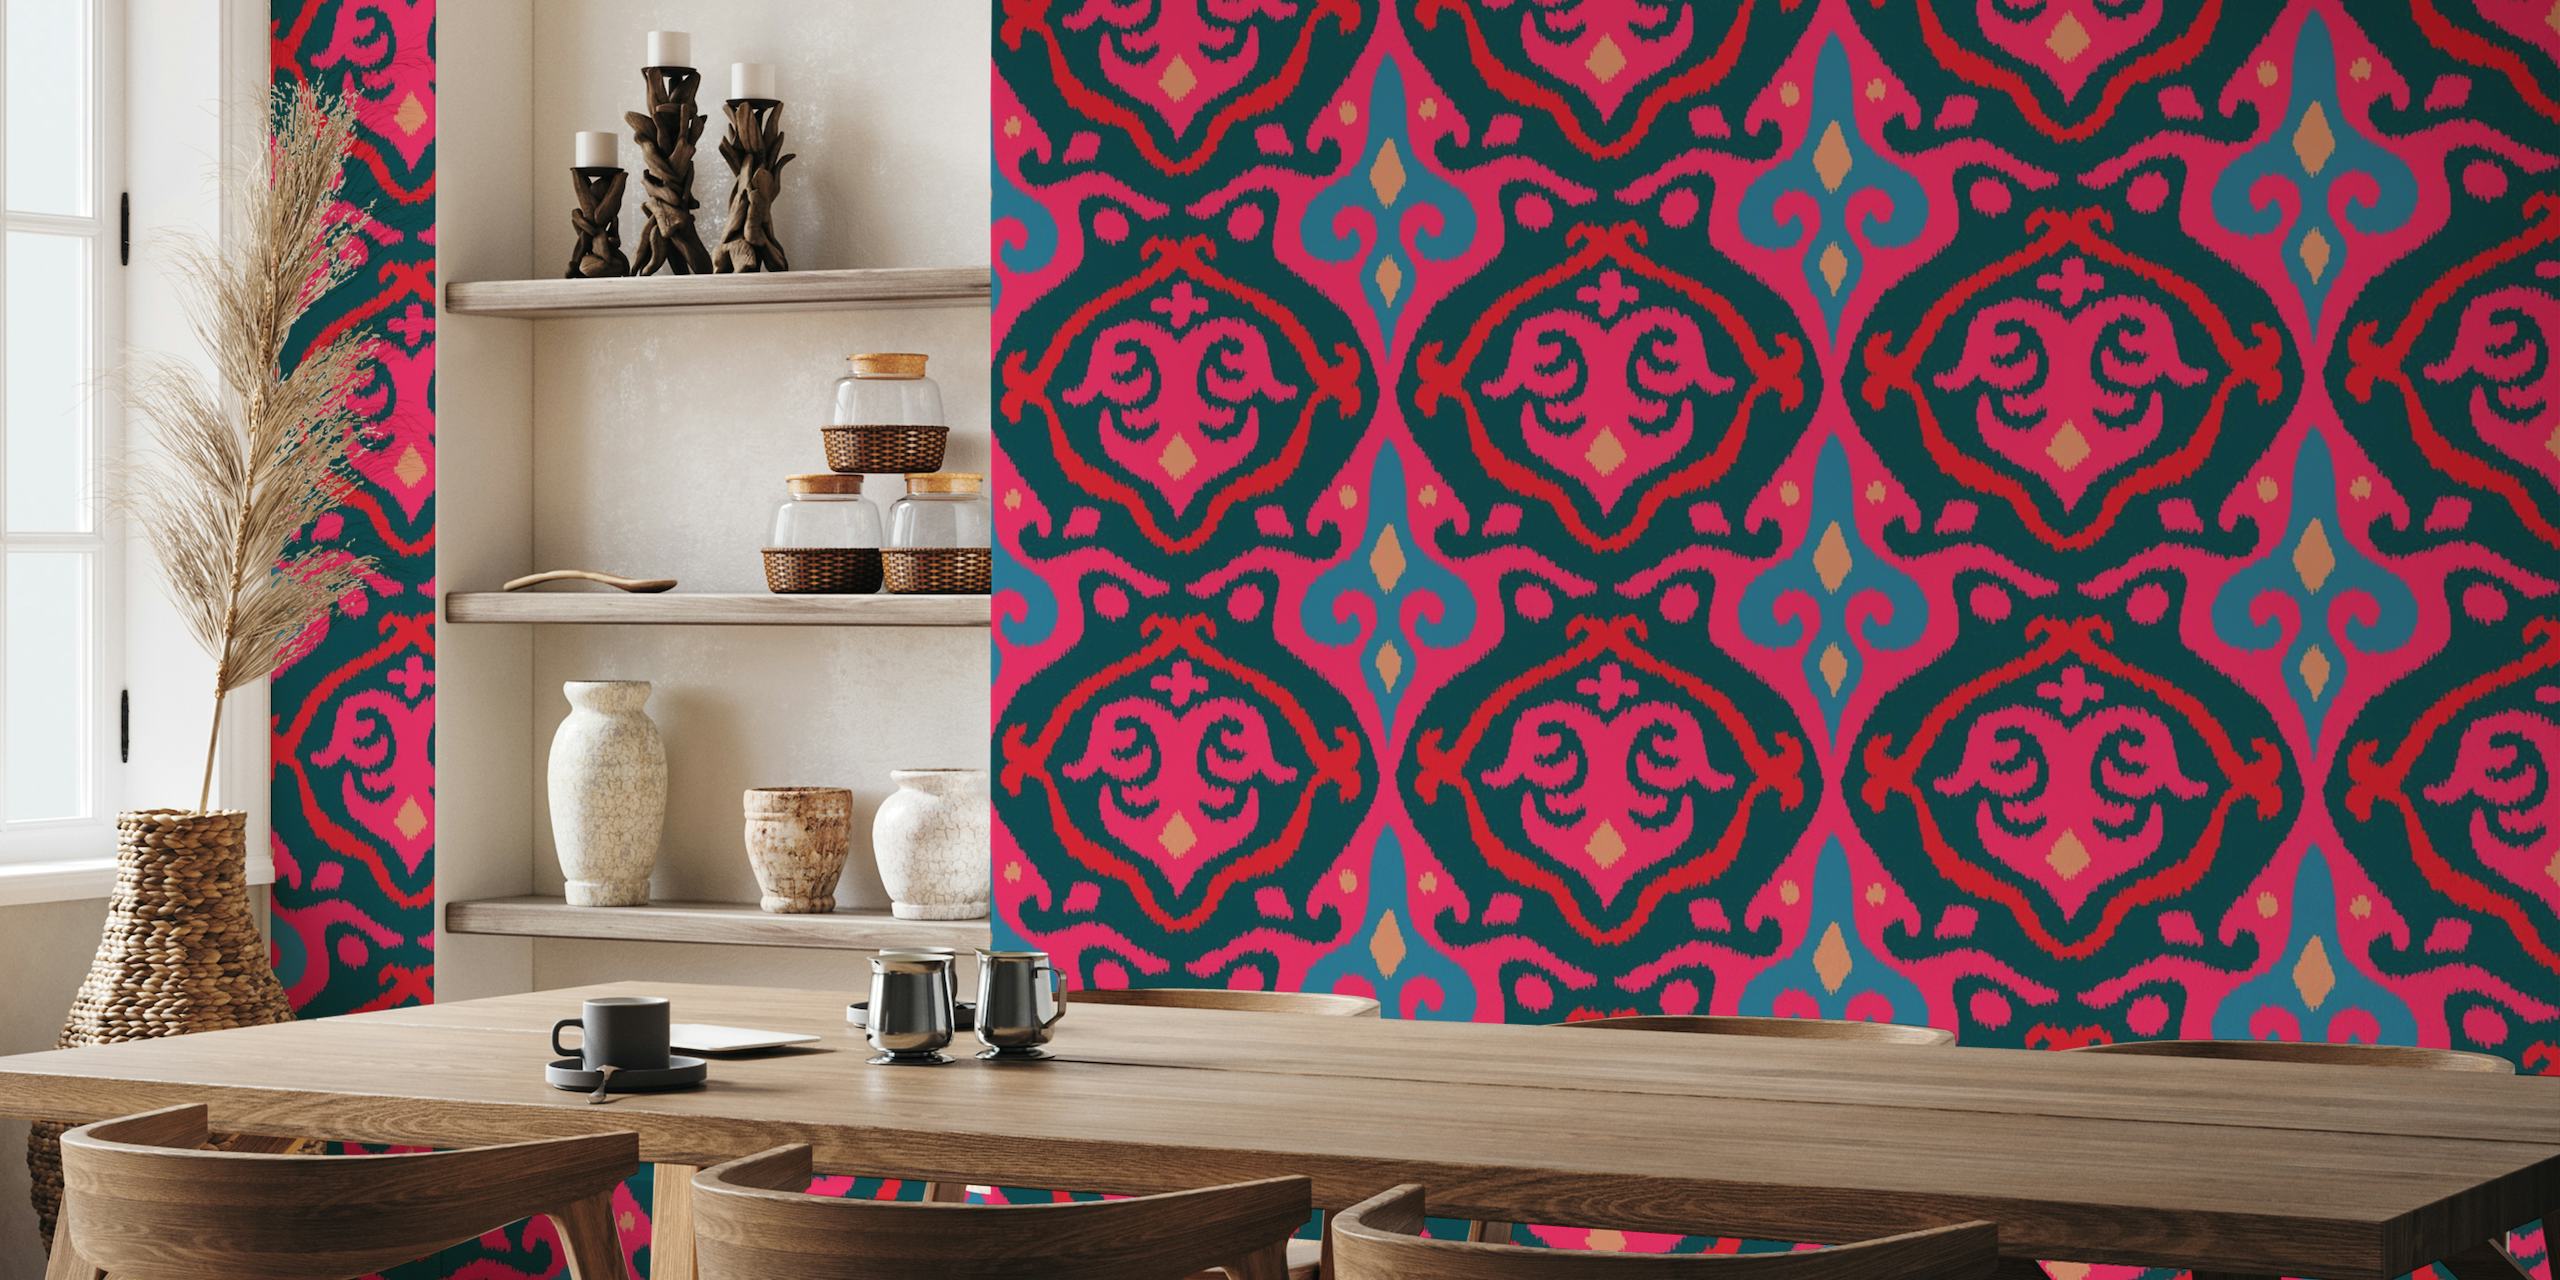 JAVA Boho Ikat Woven Texture wall mural featuring large-scale pink and blue pattern